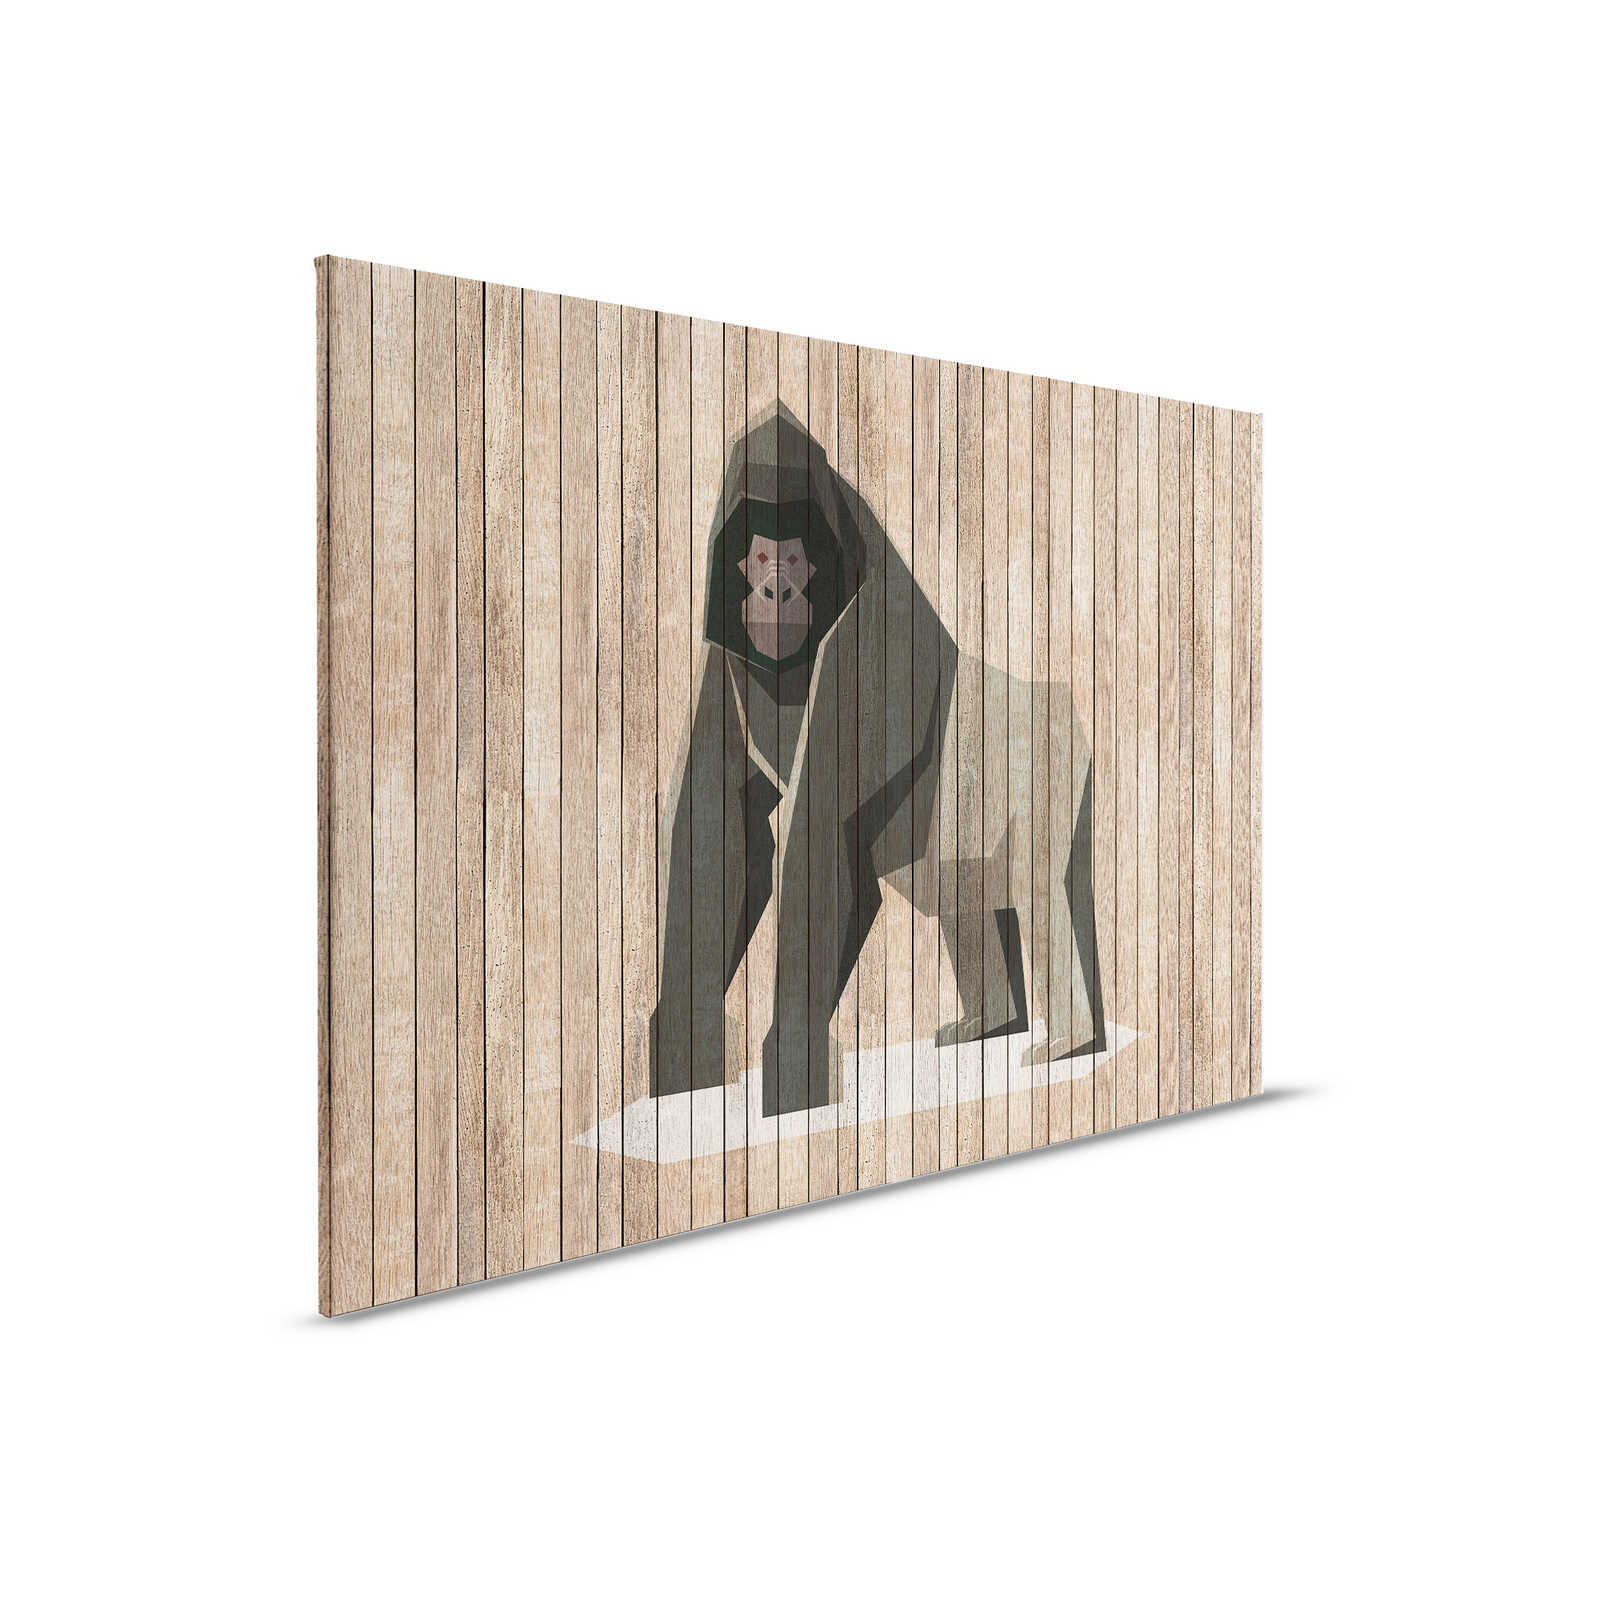         Born to Be Wild 3 - Canvas painting Gorilla on board wall - Wooden panels Wide - 0.90 m x 0.60 m
    